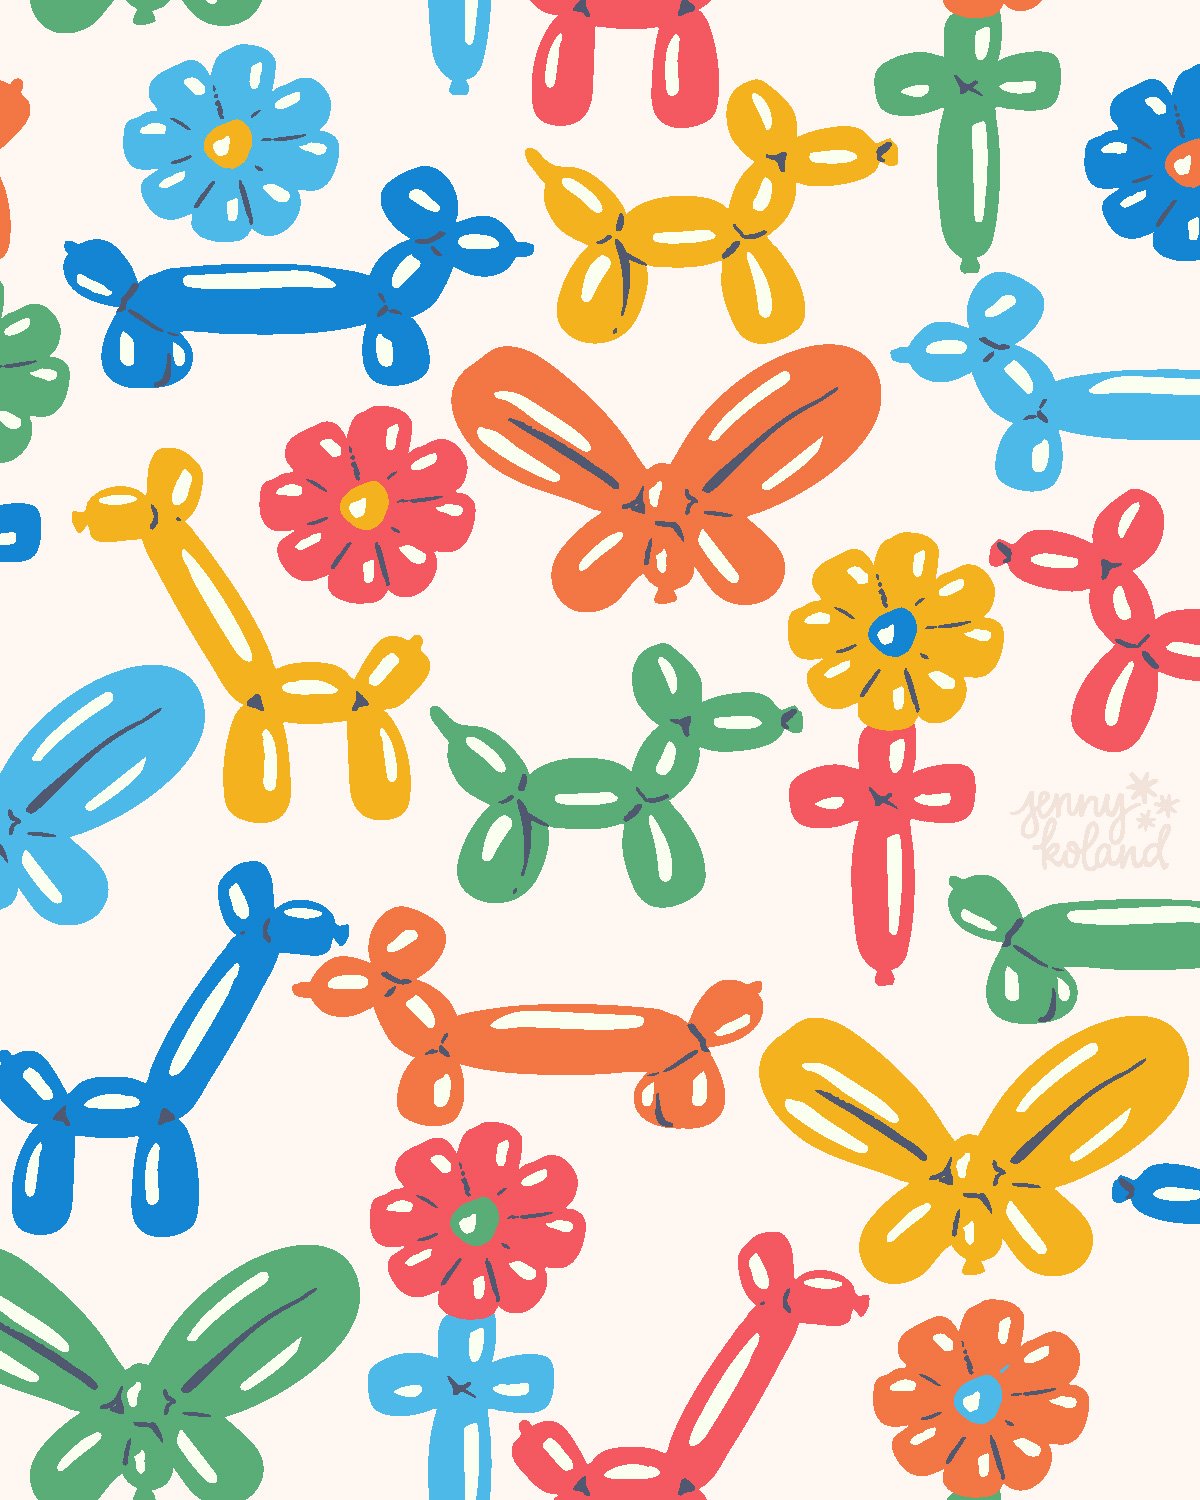 Getting ready for a certain toddler's birthday party this weekend and balloons are on the brain! I went for a kid's party vibe with my entry for this week's #spoonflower challenge: Party Wall. Voting is now open! 

Now off to finish my party prep... 